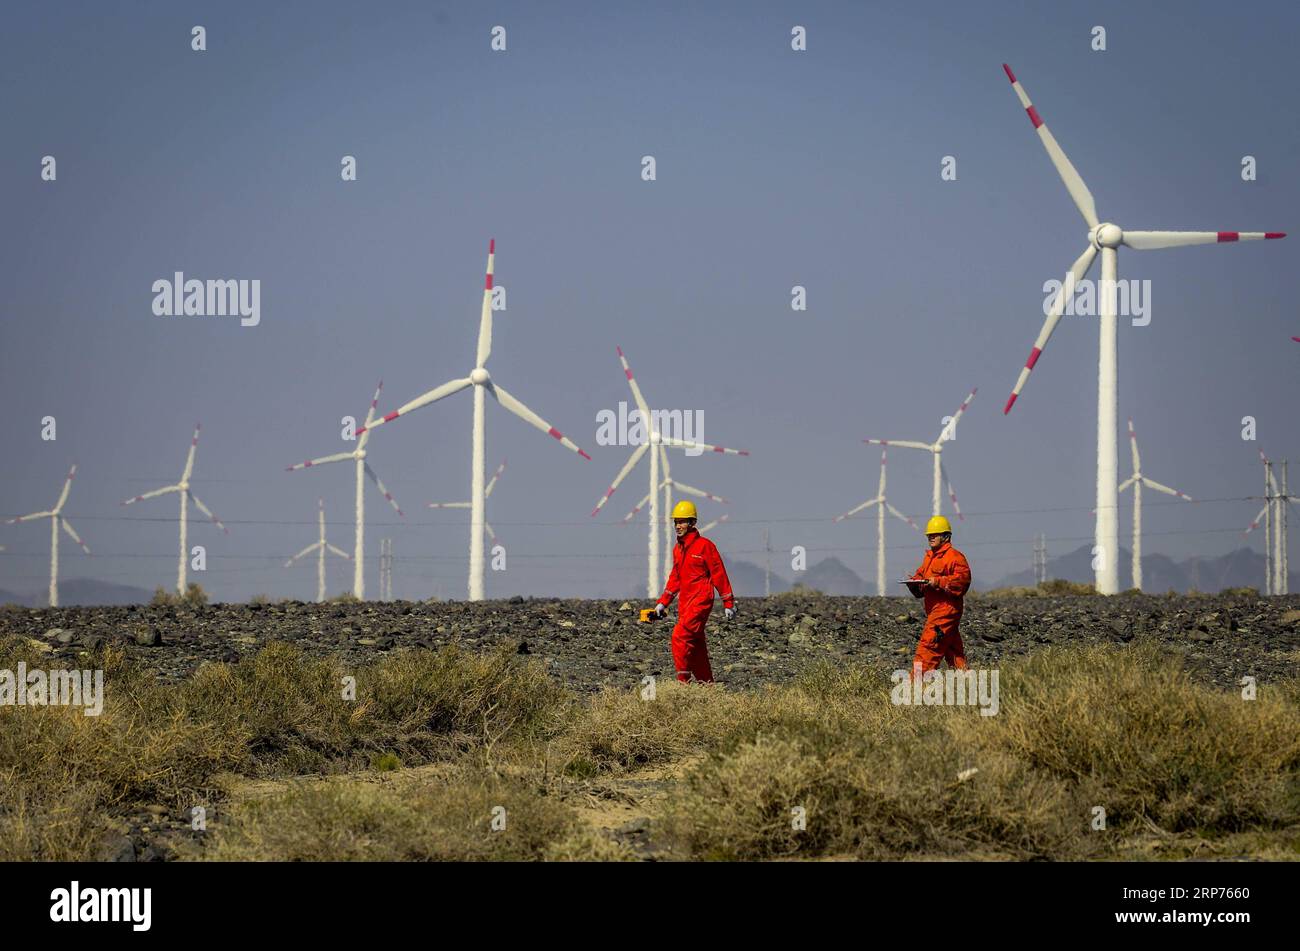 (190129) -- BEIJING, Jan. 29, 2019 (Xinhua) -- Workers check equipment at a wind power plant in Urumqi, northwest China s Xinjiang Uygur Autonomous Region, Sept. 18, 2018. New energy power generation saw double digit growth last year in northwest China s Xinjiang Uygur Autonomous Region amid efforts to reduce coal consumption to improve the energy mix. Wind and solar power generation rose 15.2 percent and 13.6 percent to 36 billion kwh and 11.7 billion kwh respectively, according to the regional development and reform commission. It said 22.9 percent of installed wind power generating capacity Stock Photo